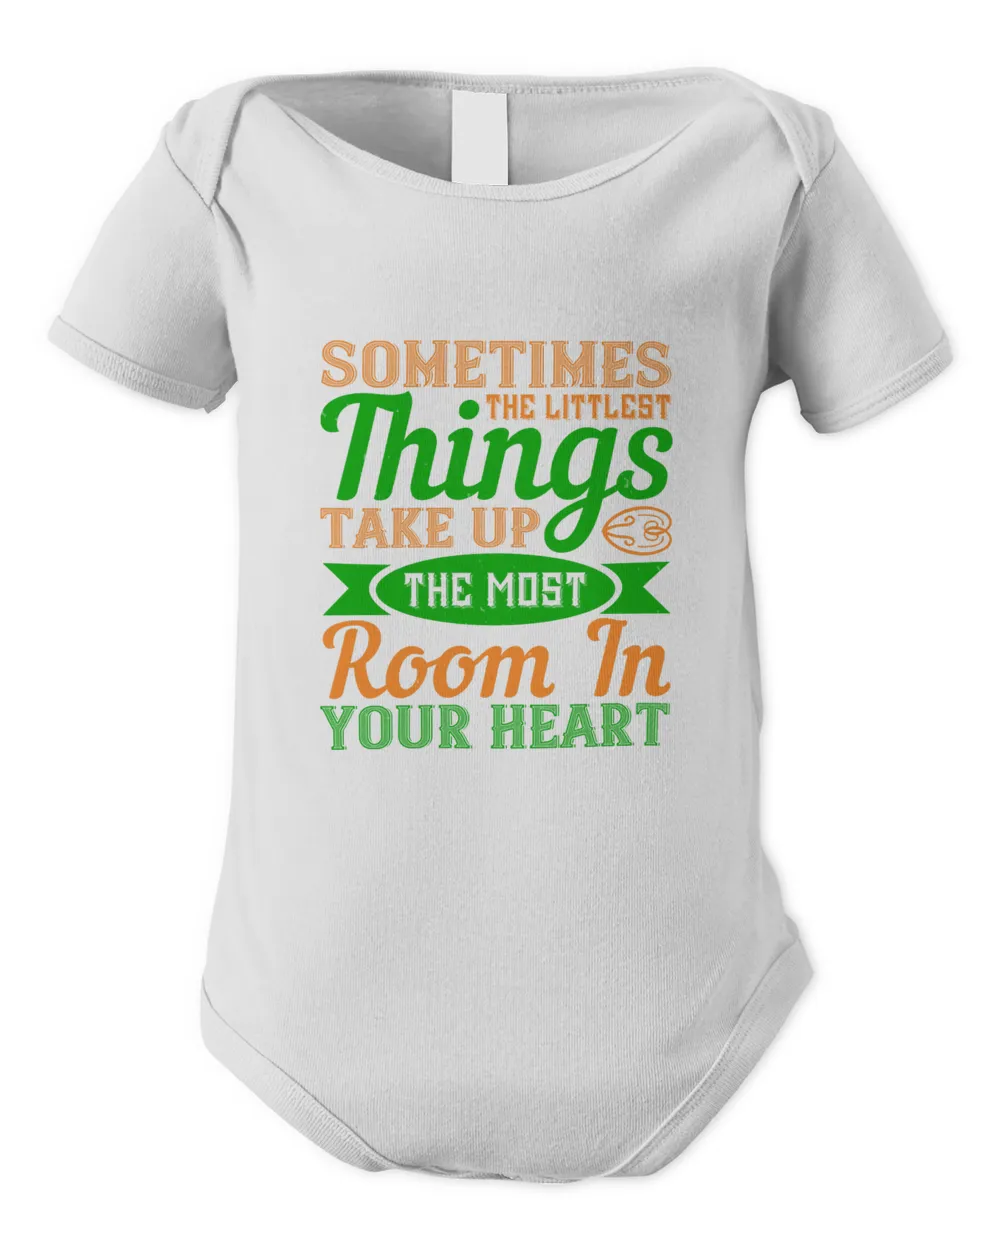 Sometimes The Littlest Things Take Up The Most Room In Your Heart Baby Shirt, Gift For Family, Toddler T Shirt, Baby Bodysuit